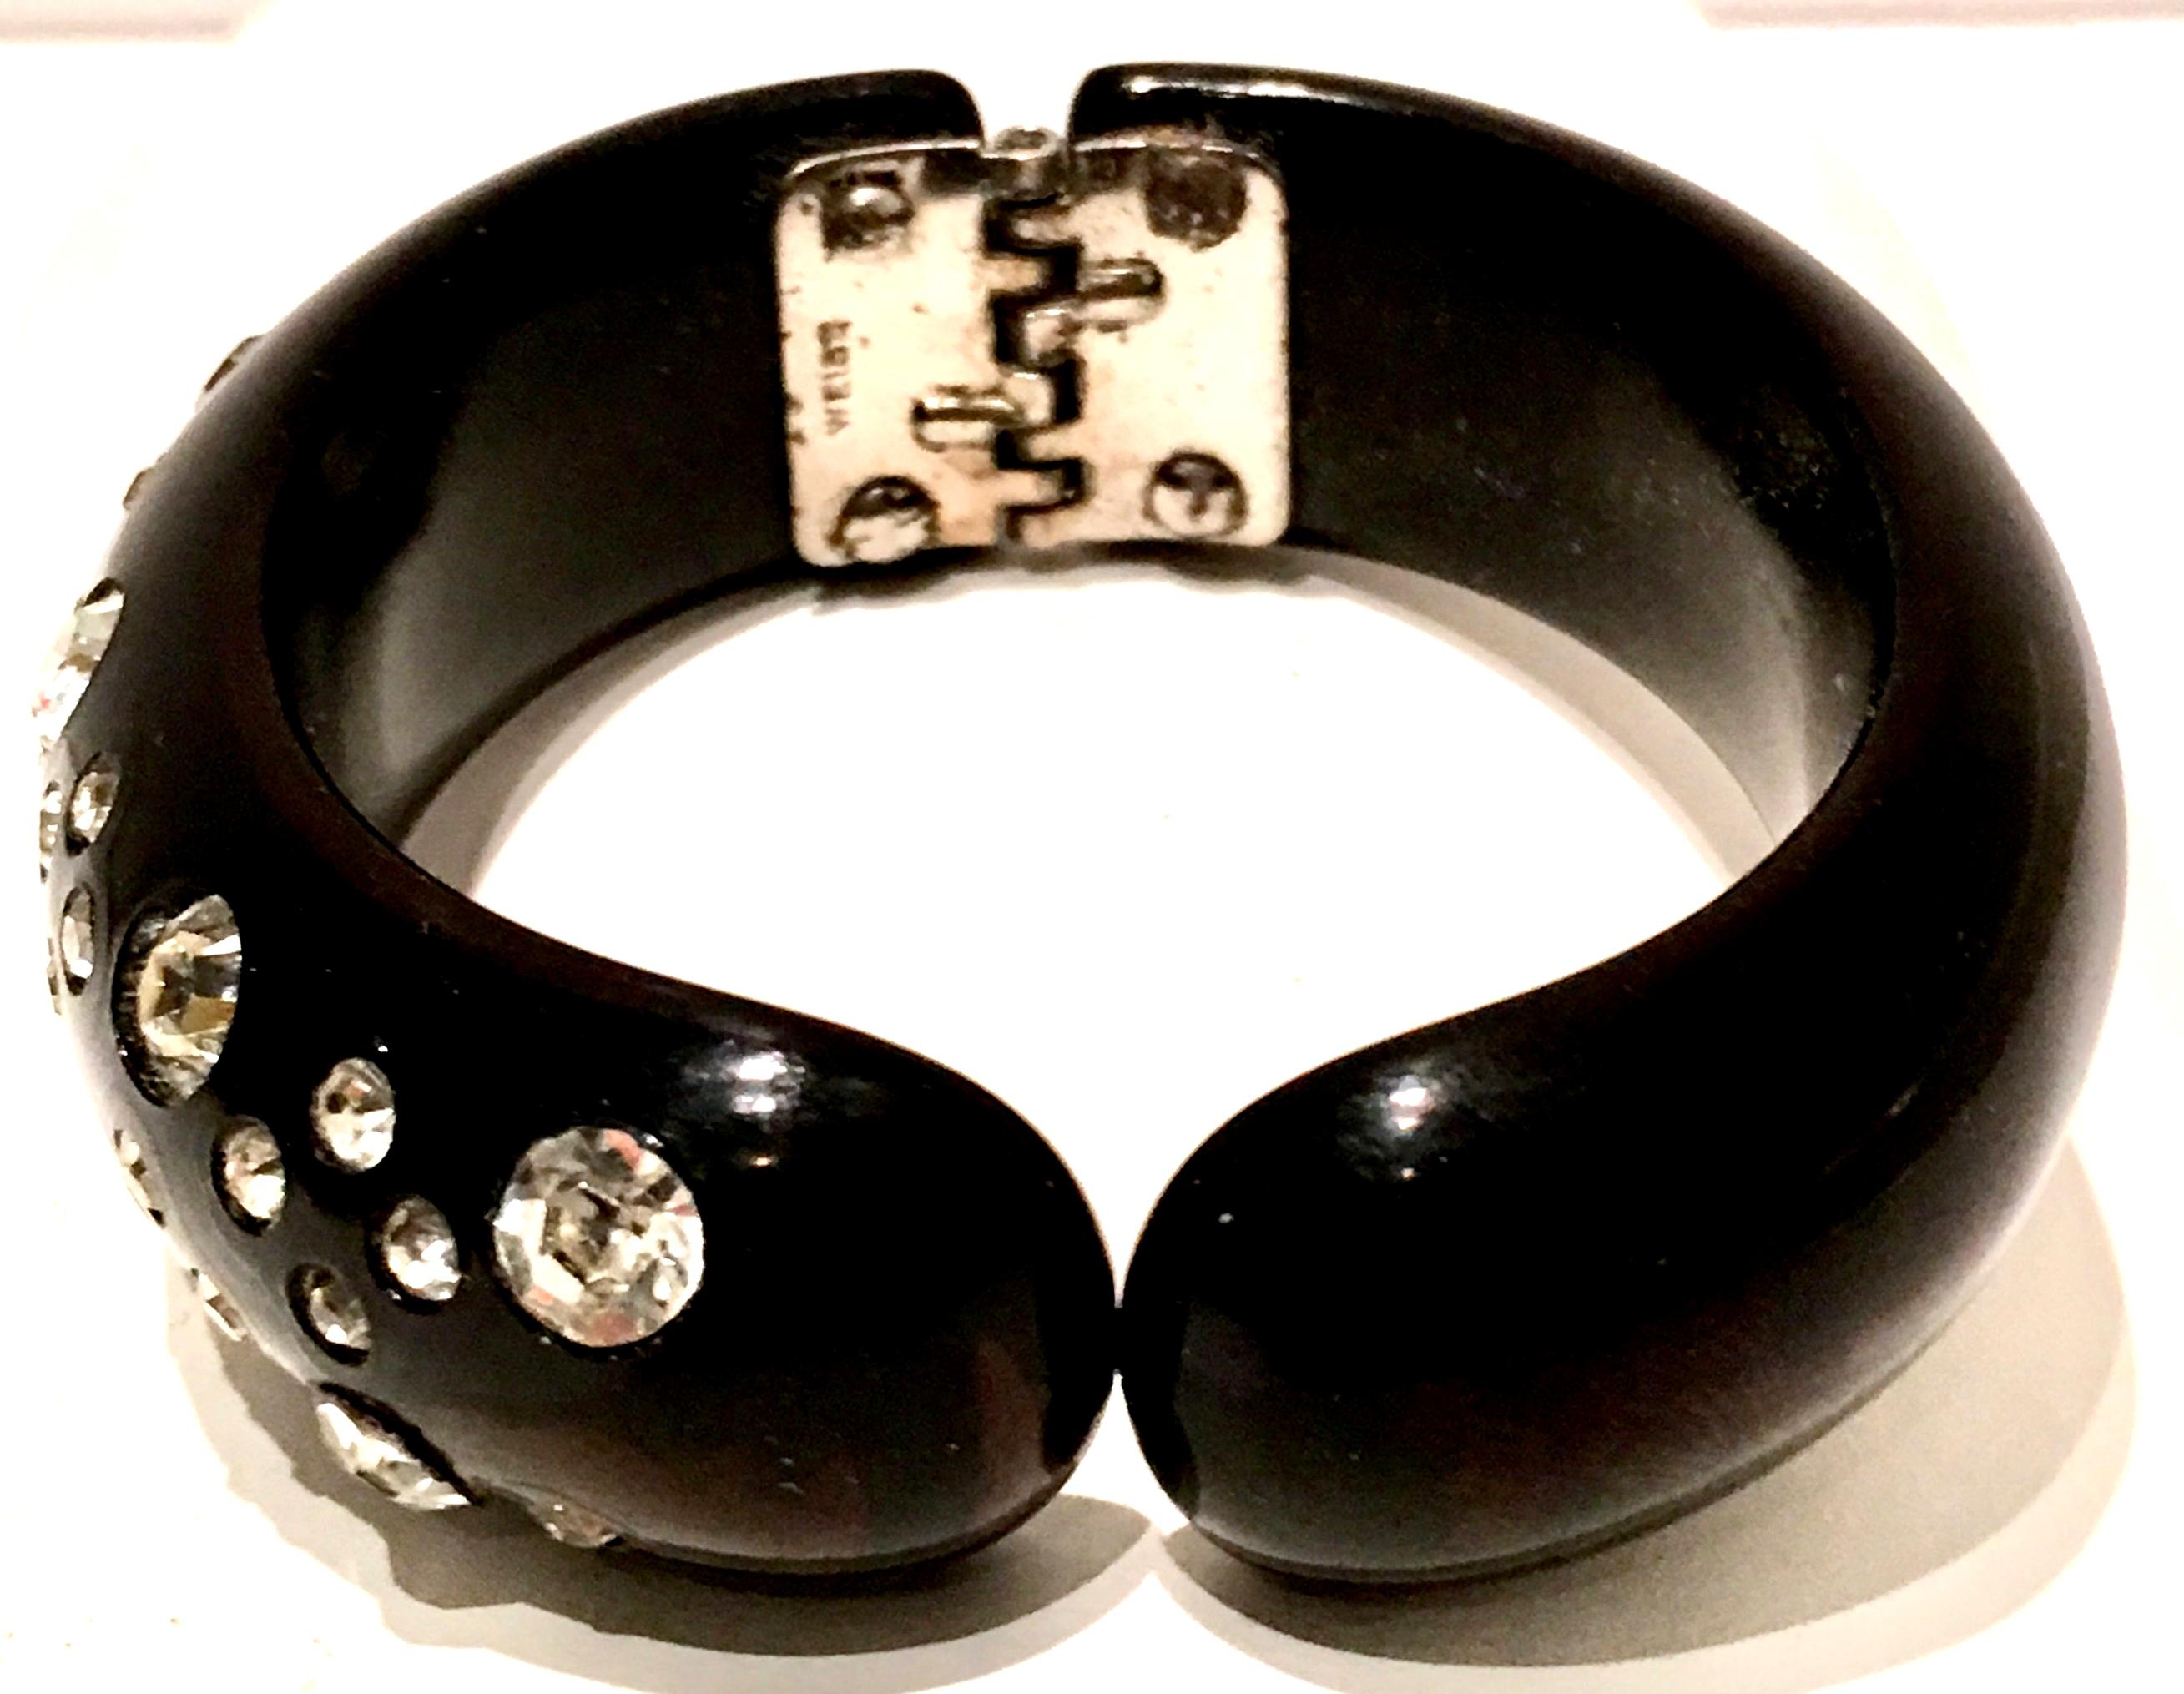 1950'S Coveted Black & Crystal Clear Swarovski Rhinestone, Signed Clamper Cuff Bracelet By, Weiss.. This piece is signed on the silver chrome metal hinge interior, Weiss.
Internal diameter measures, 2